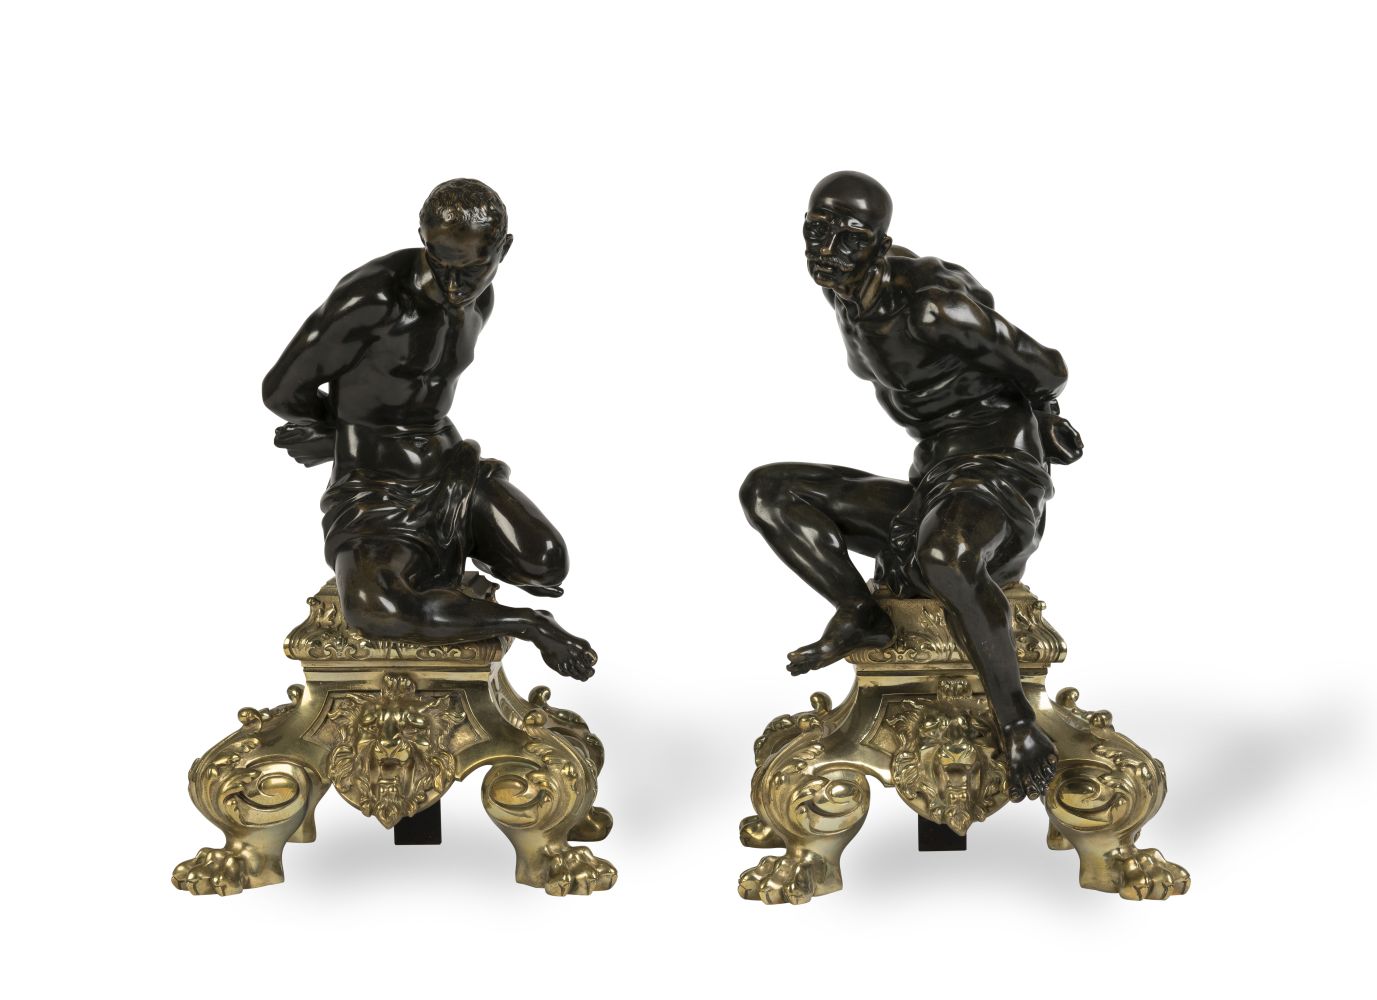 A PAIR OF PATINATED AND GILT-BRONZE FIGURAL CHENETSAfter the model by Pietro Tacca, 20th century (2)